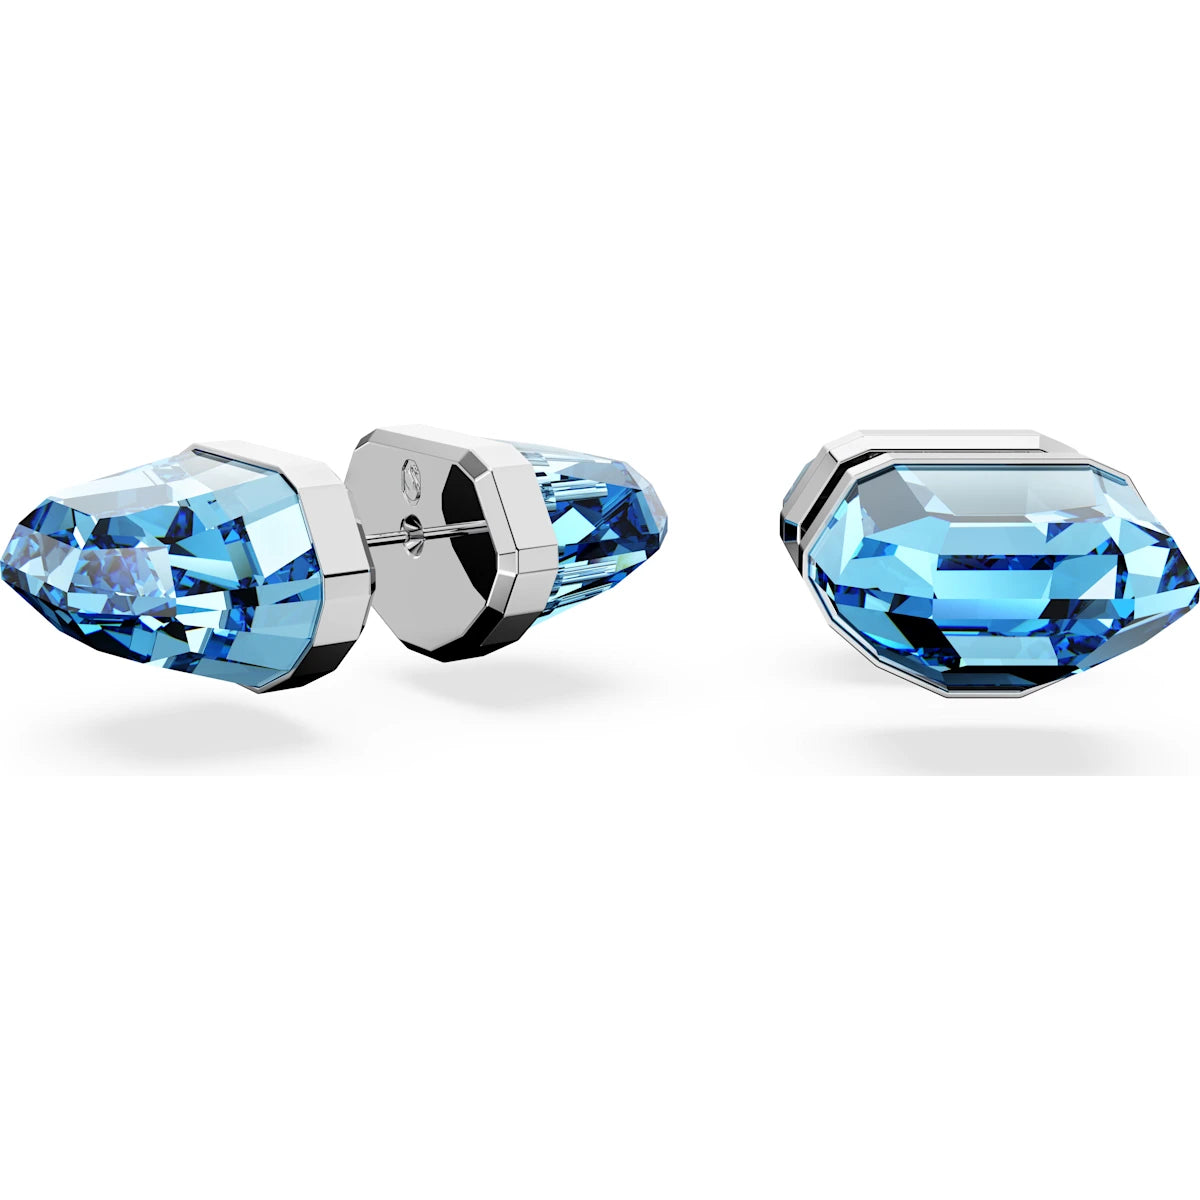 Swarovski Lucent stud earrings, Blue, Rhodium plated 5626606- Discontinued